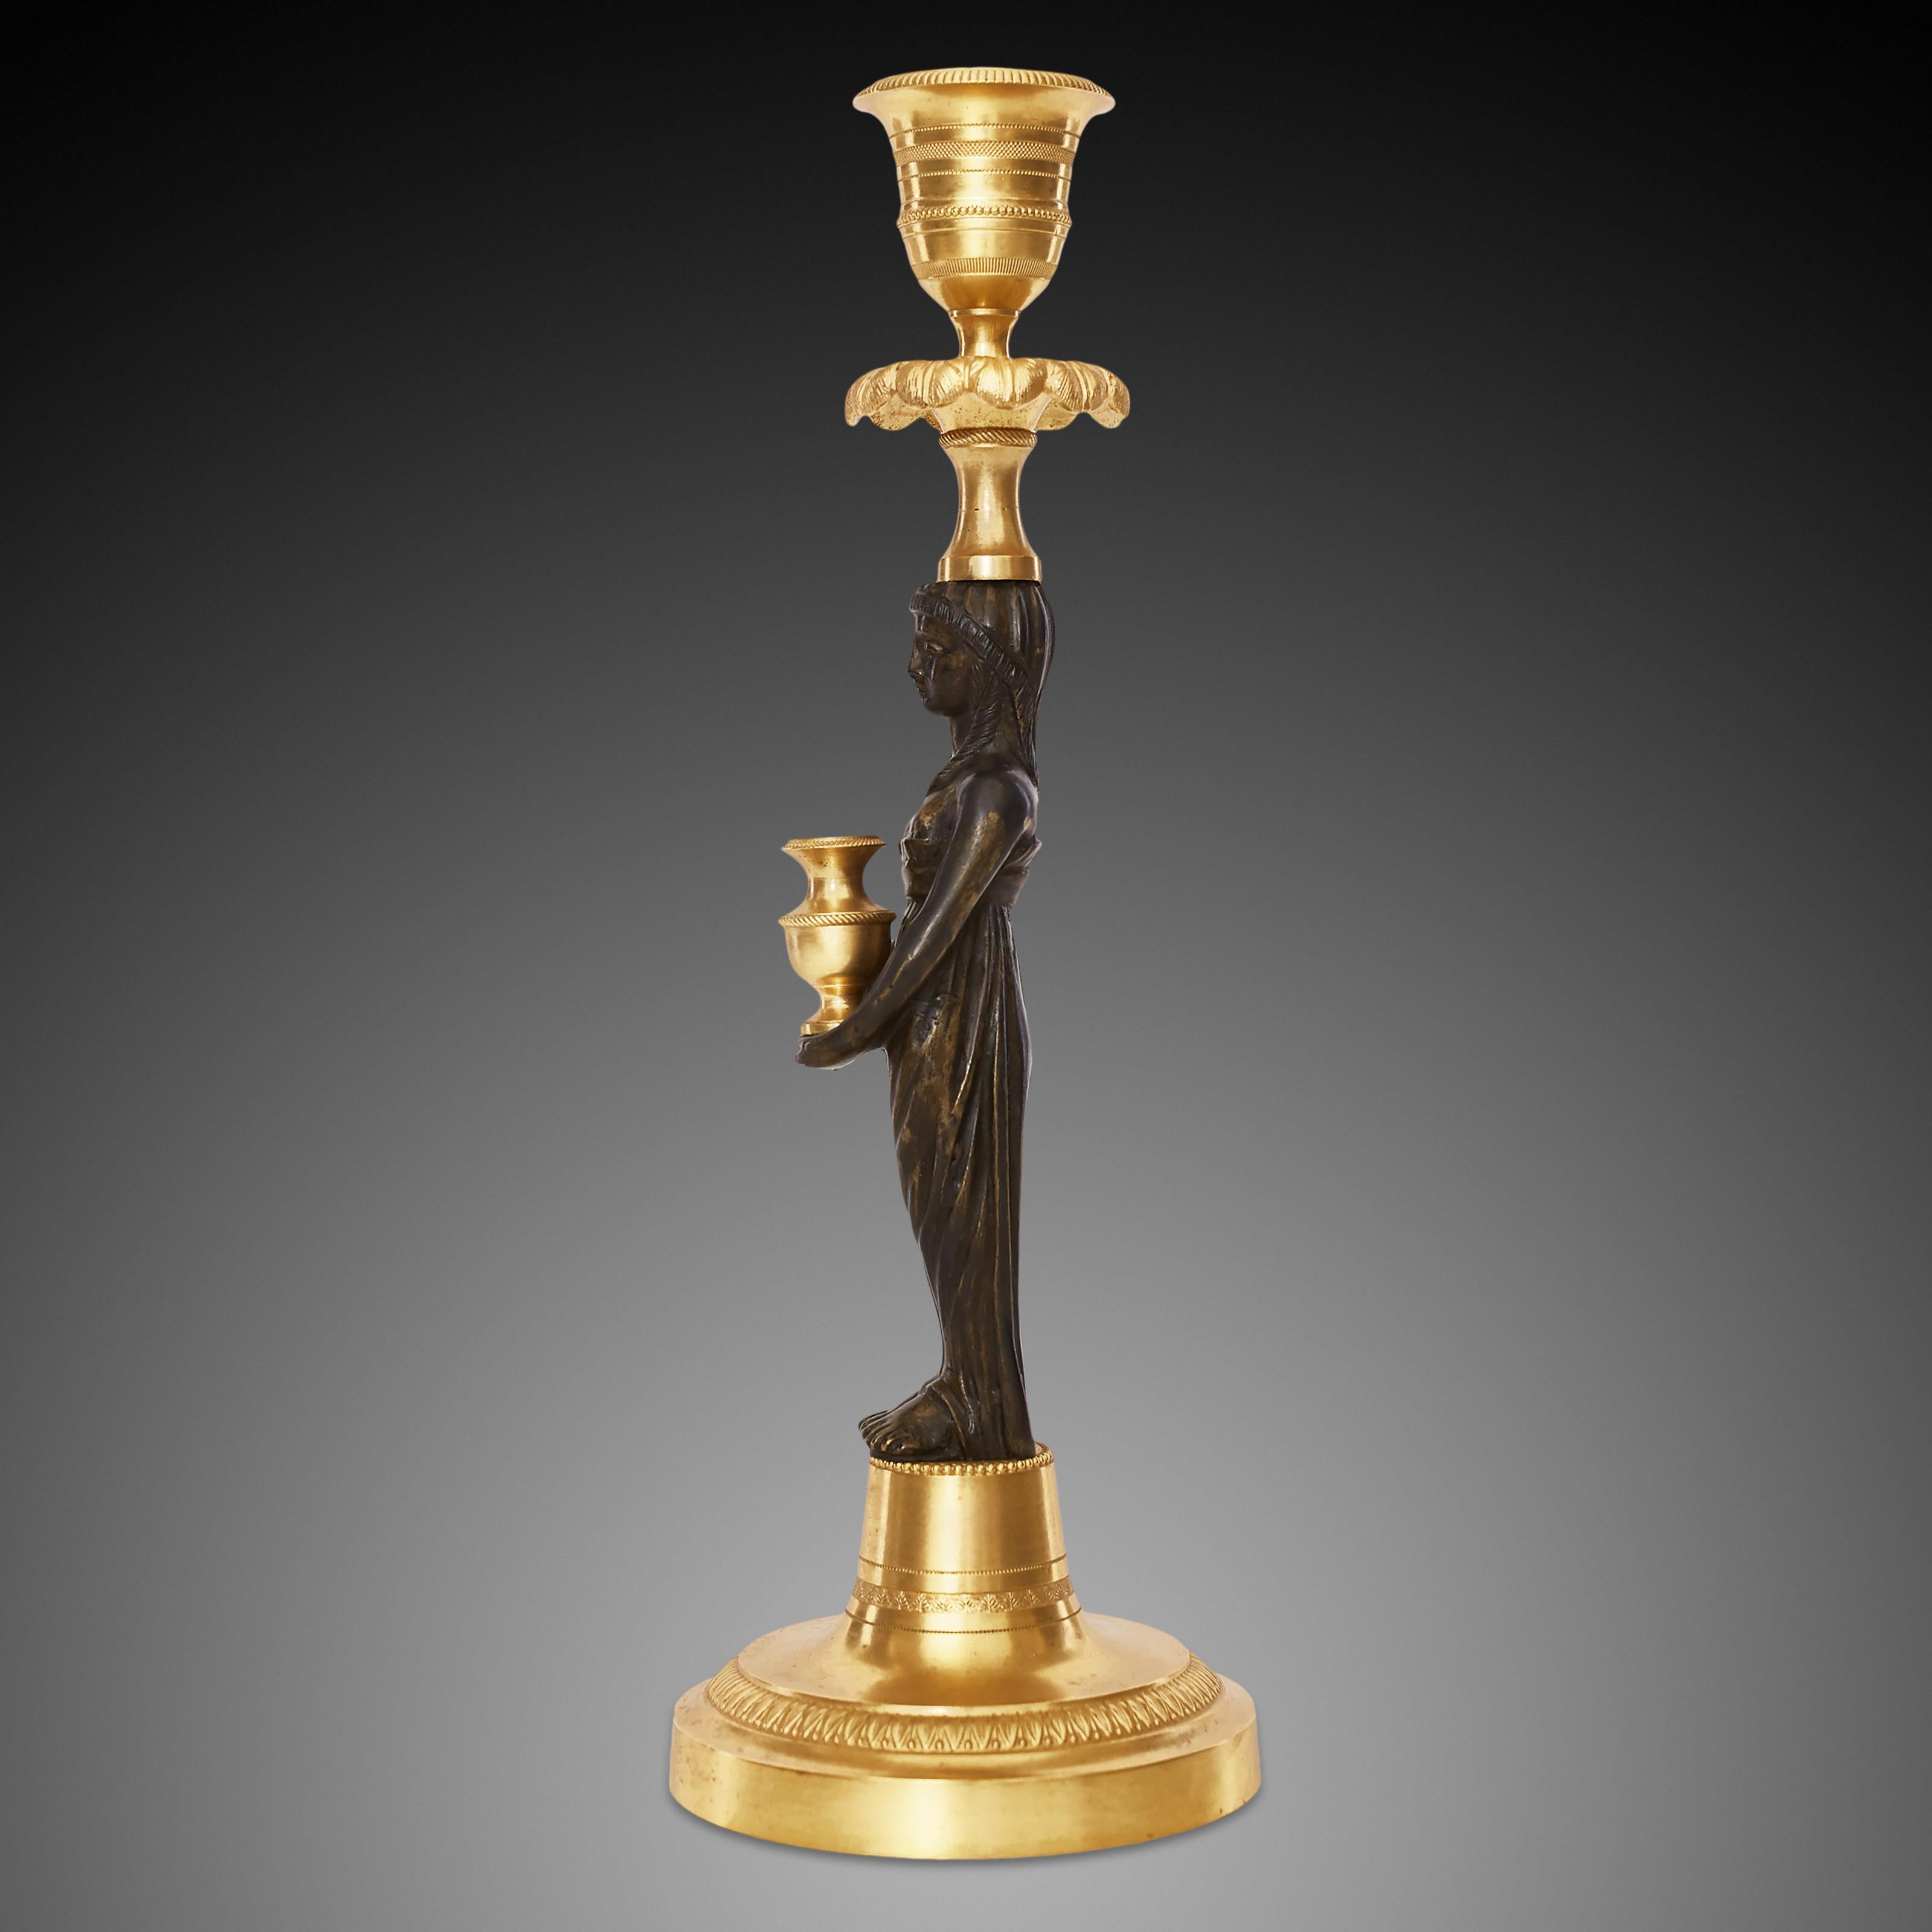 A pair of gilded bronze patinated candlesticks, each depicting a figure of a woman holding a golden-colored jug in her hand. The candlestick at the top is decorated with a pattern resembling a crown of leaves.